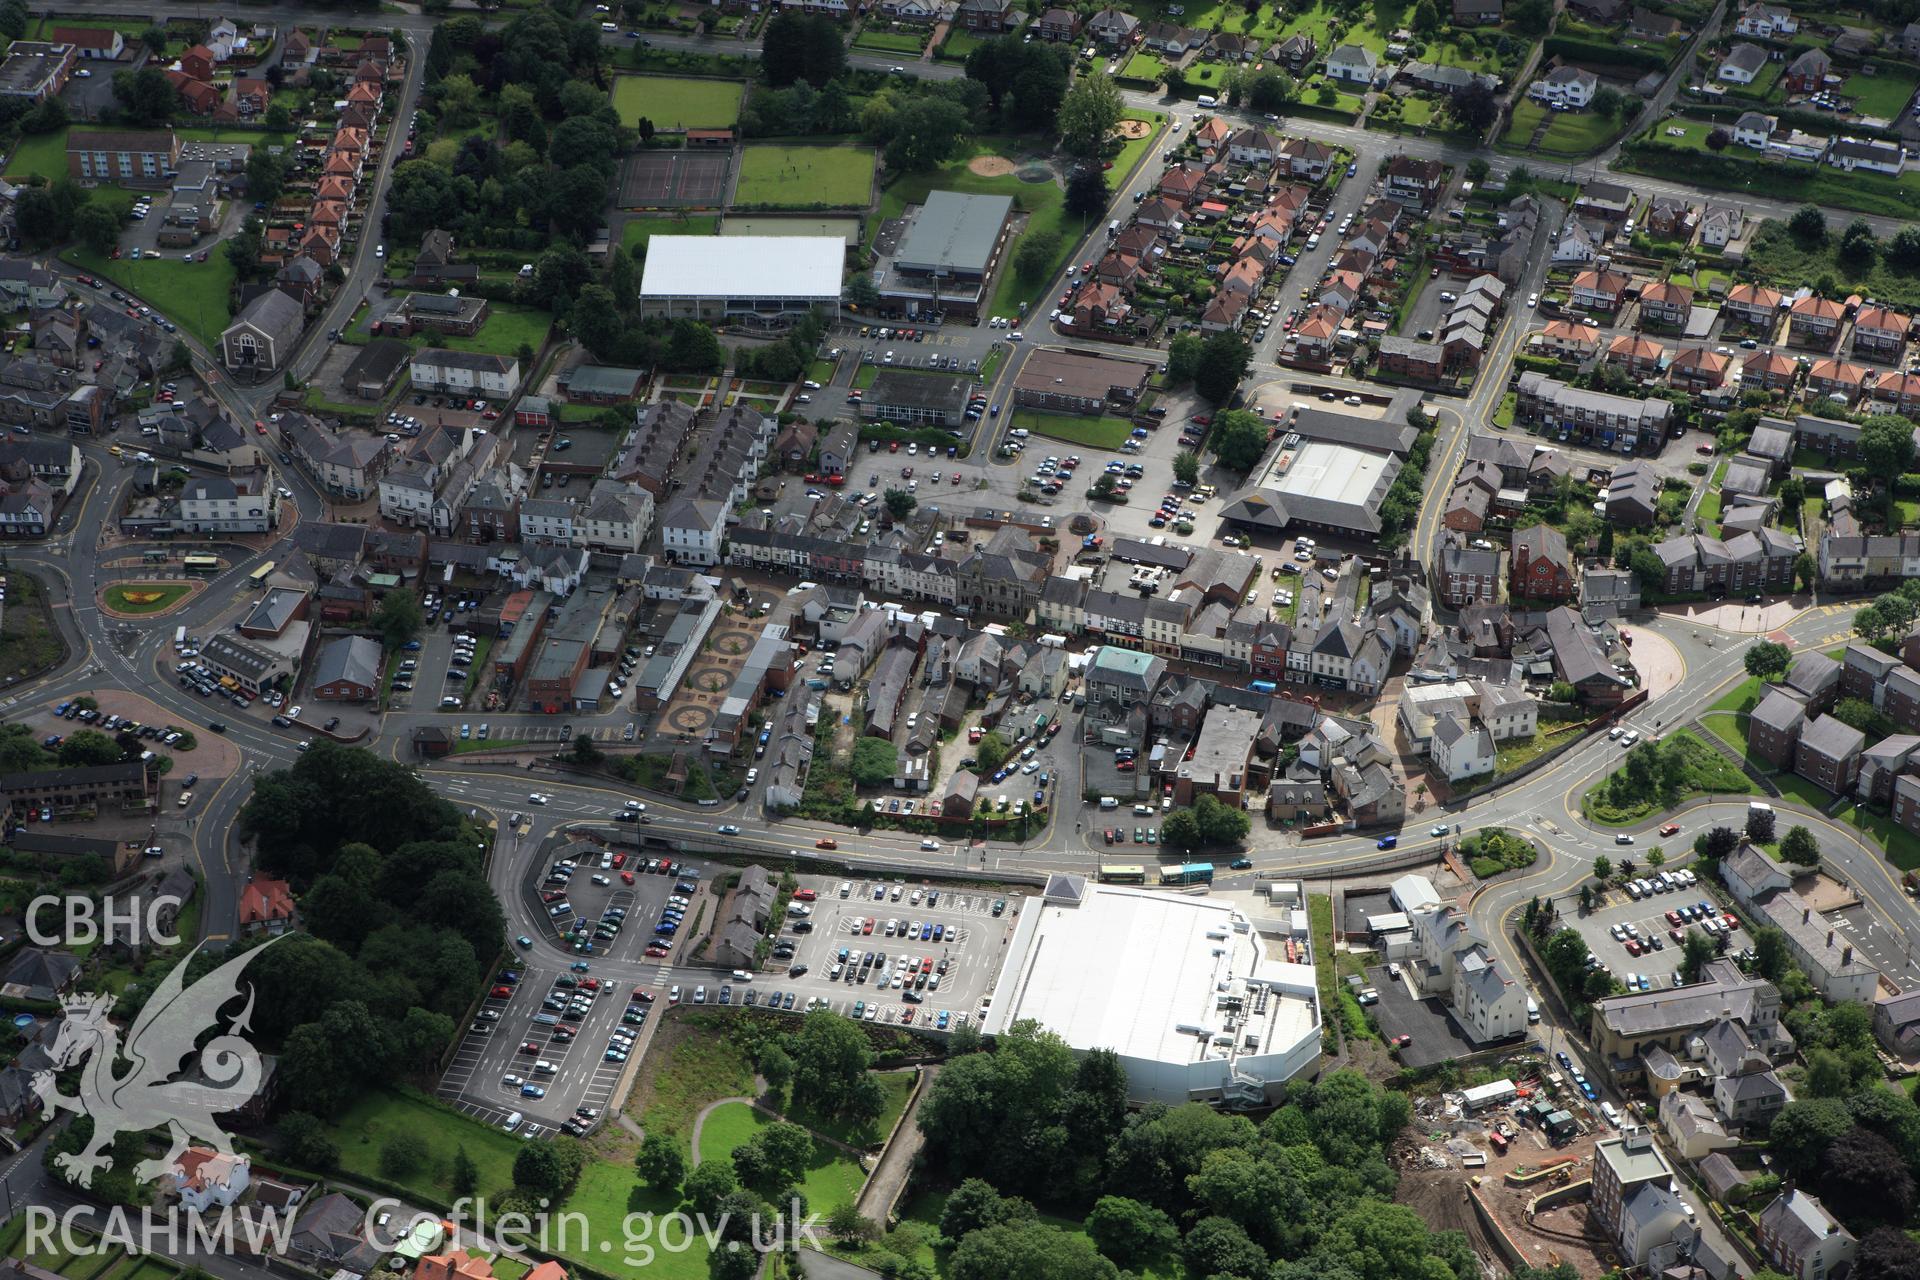 RCAHMW colour oblique aerial photograph of Holywell town, from north. Taken on 30 July 2009 by Toby Driver